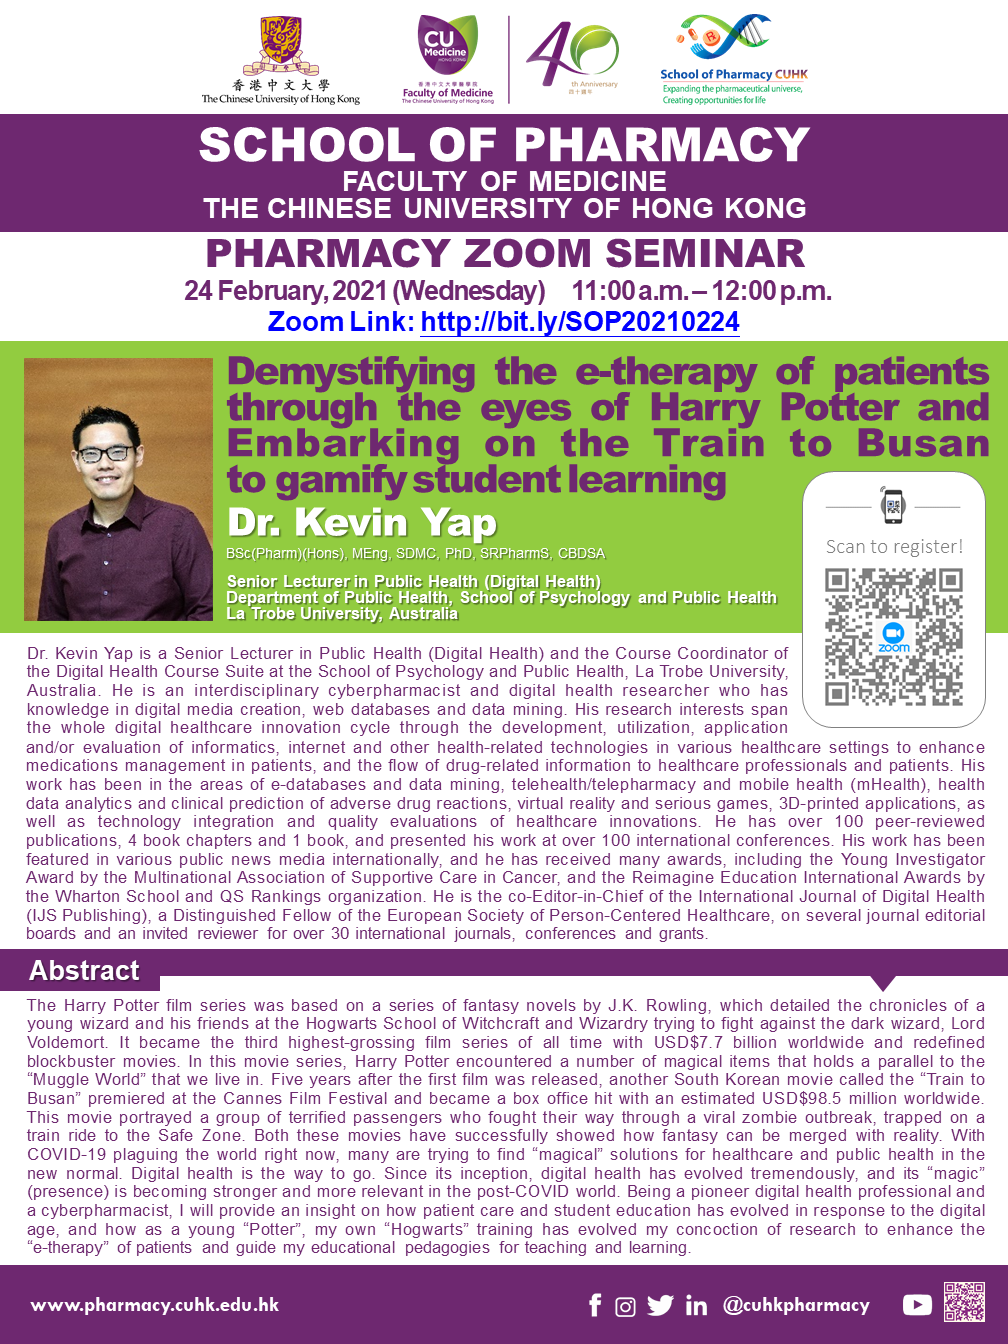 Pharmacy Seminar -  Demystifying the e-therapy of patients through the eyes of Harry Potter and Embarking on the Train to Busan to gamify student learning by Dr. Kevin Yap